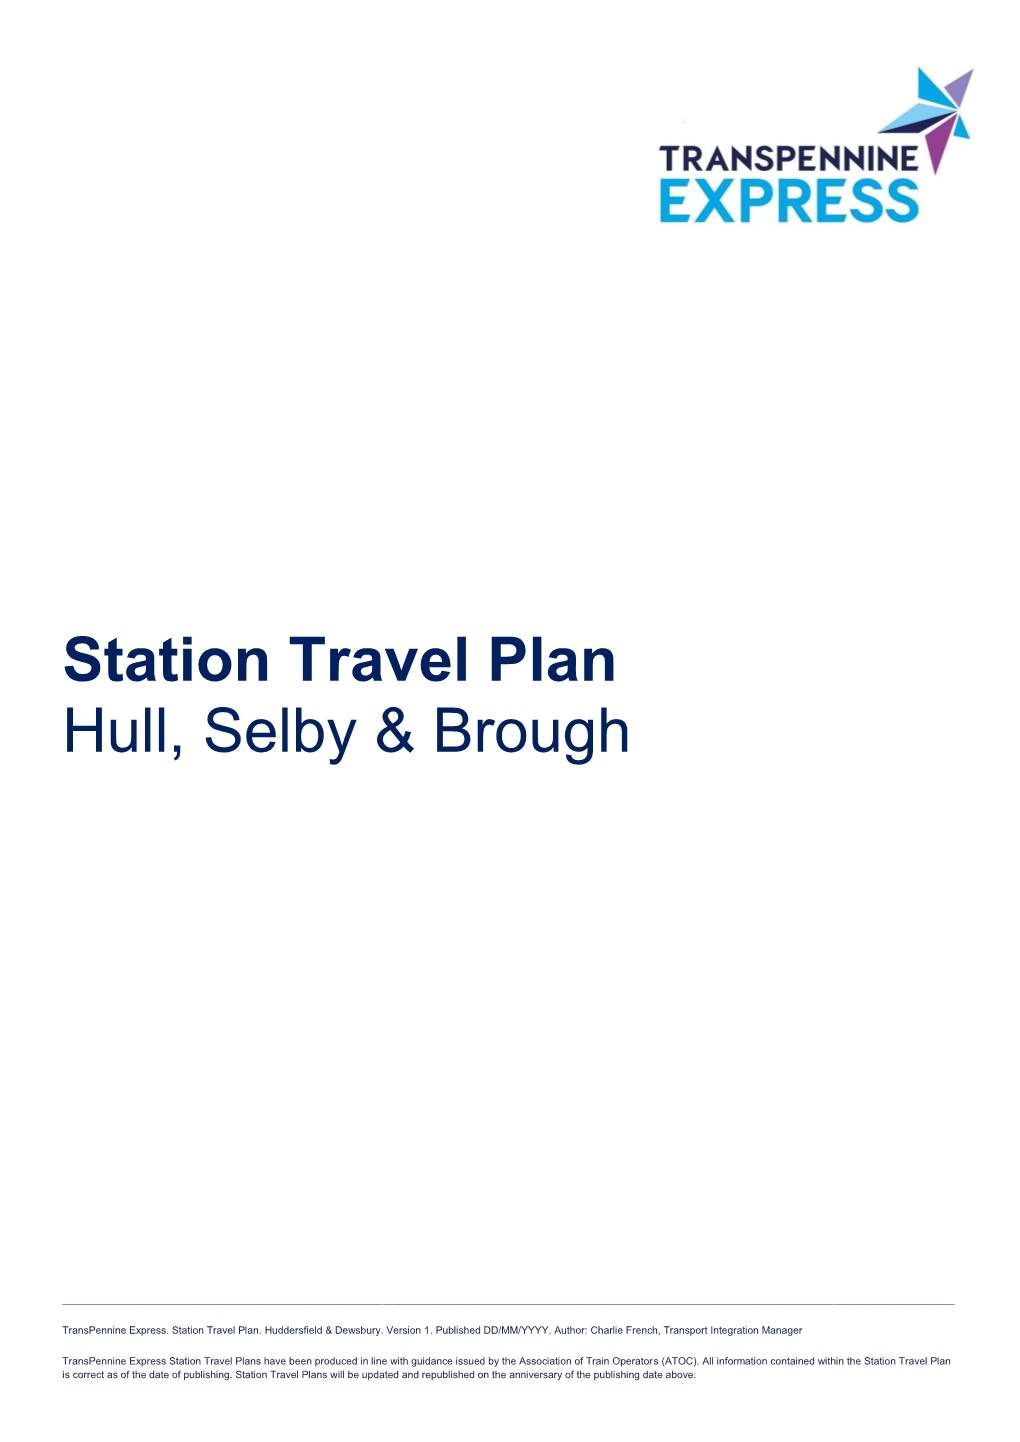 Station Travel Plan Hull, Selby & Brough